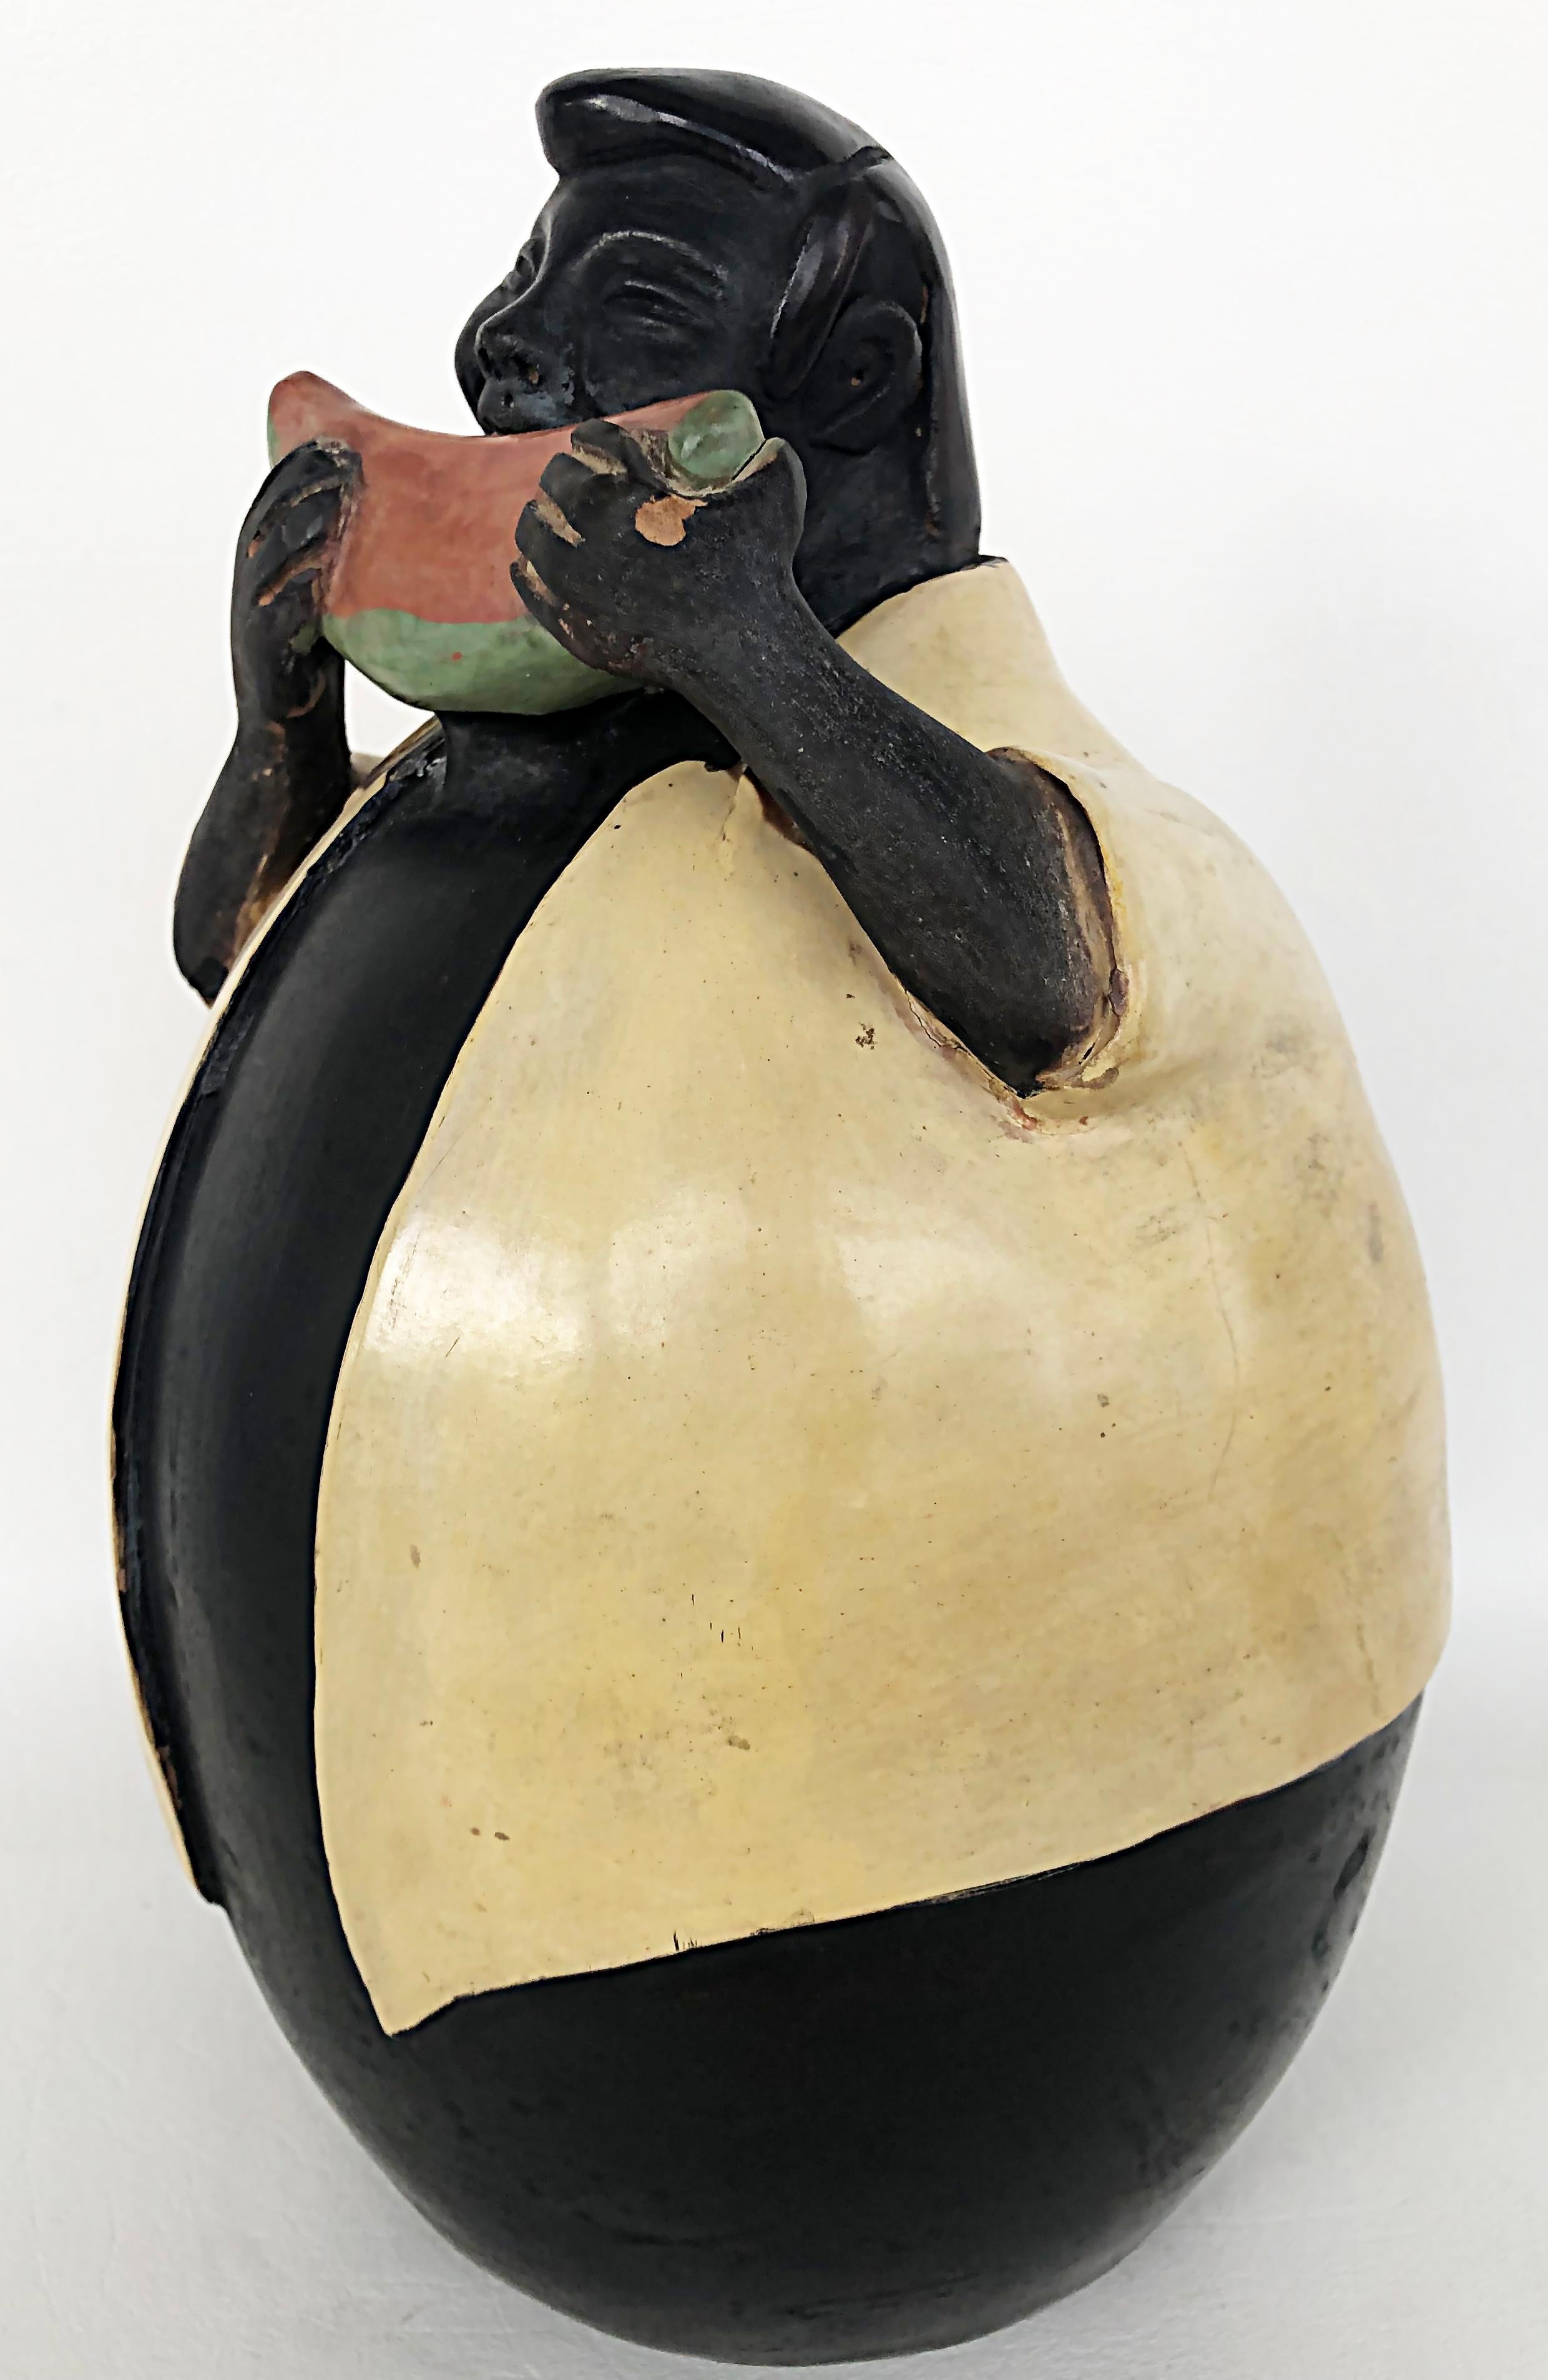 Manuel Sandoval Valez Latin American folk art figurative ceramic sculpture

Offered for sale is a folk art-style terracotta ceramic sculpture by Manuel Sandoval Valdez. The piece is signed on the base. We offer companion pieces by the artist is